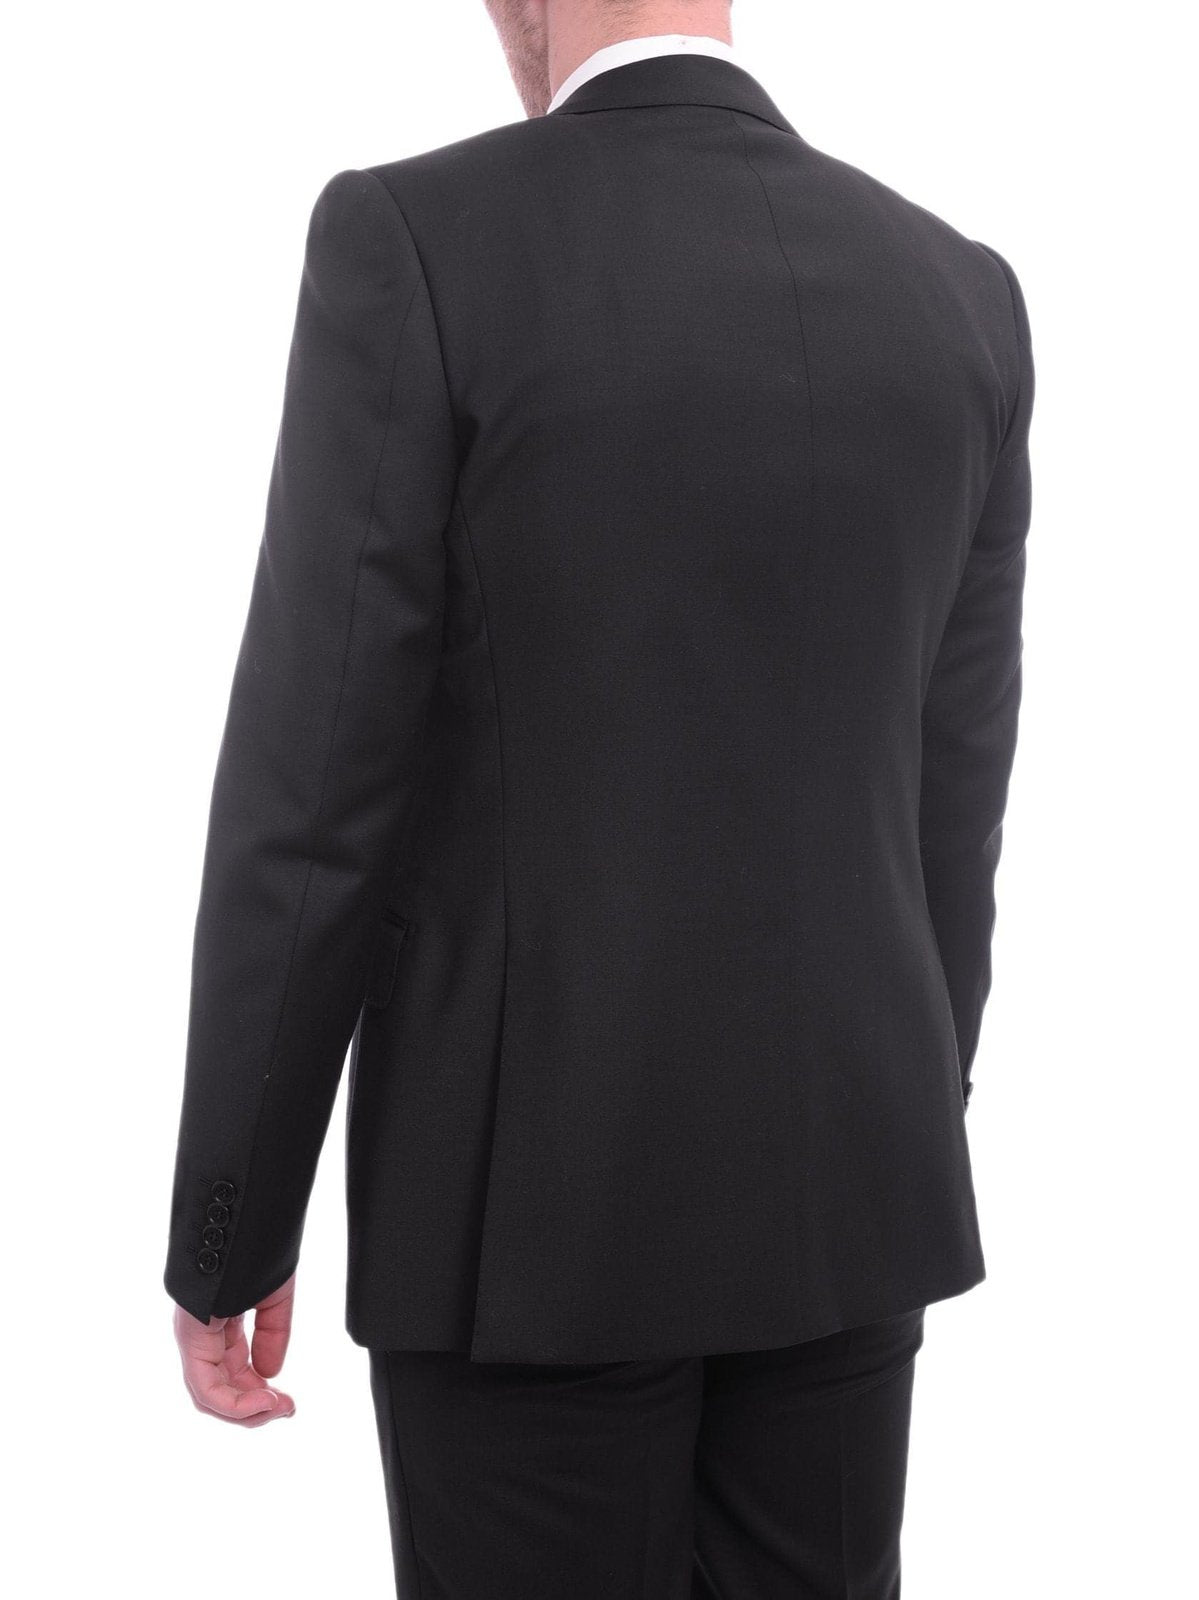 Napoli SUITS Napoli Classic Fit Solid Black Half Canvassed Wool Cashmere Blend Suit